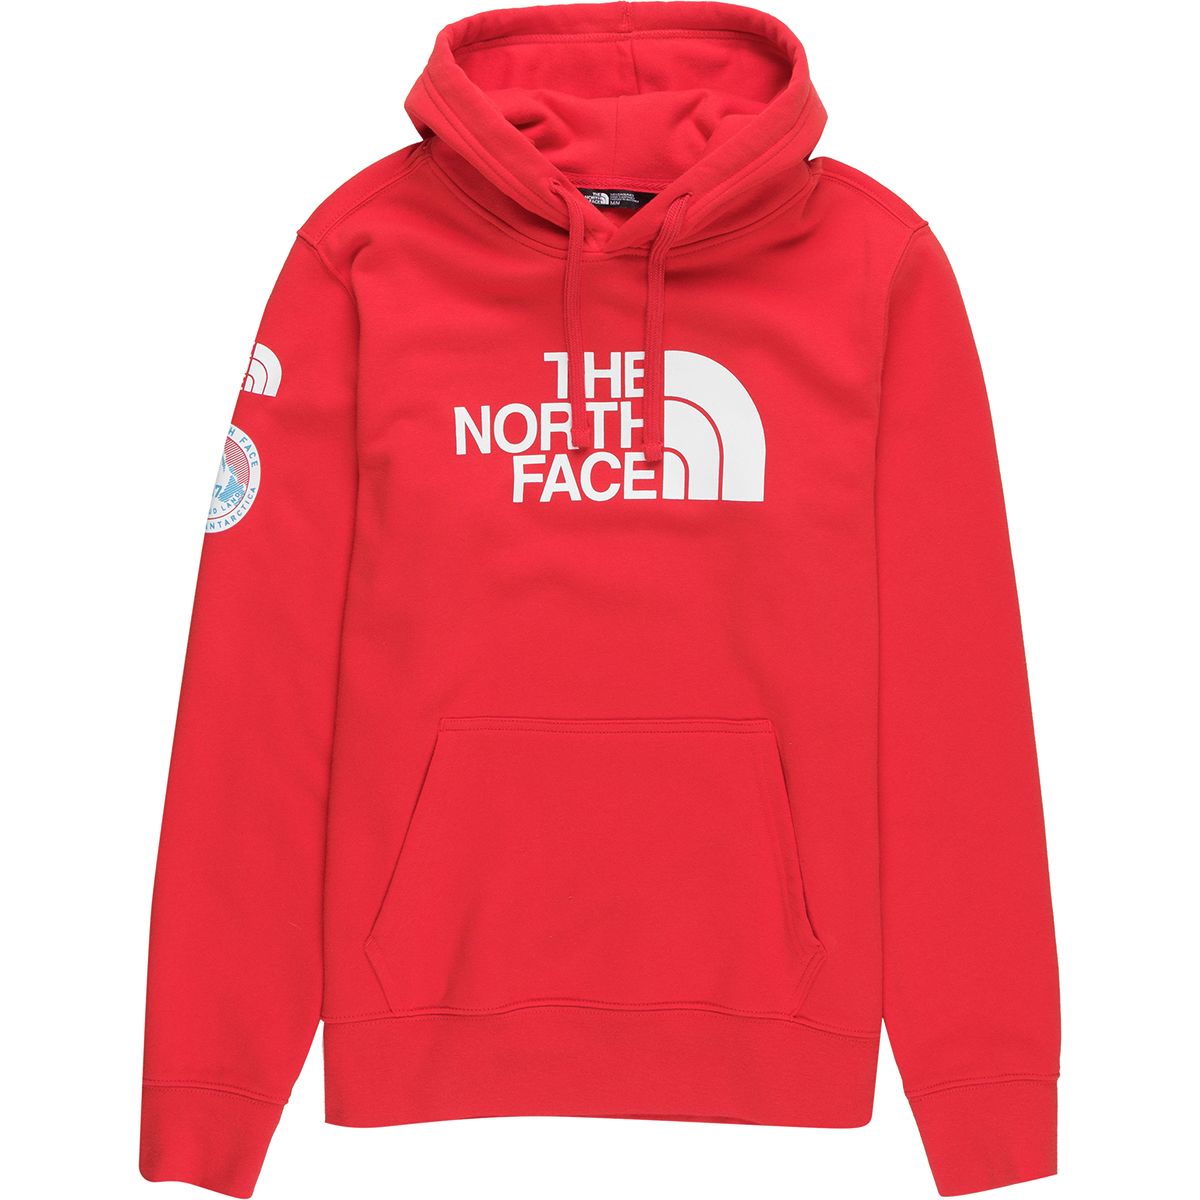 The North Face Antarctica Collectors Pullover Hoodie - Men's - Clothing